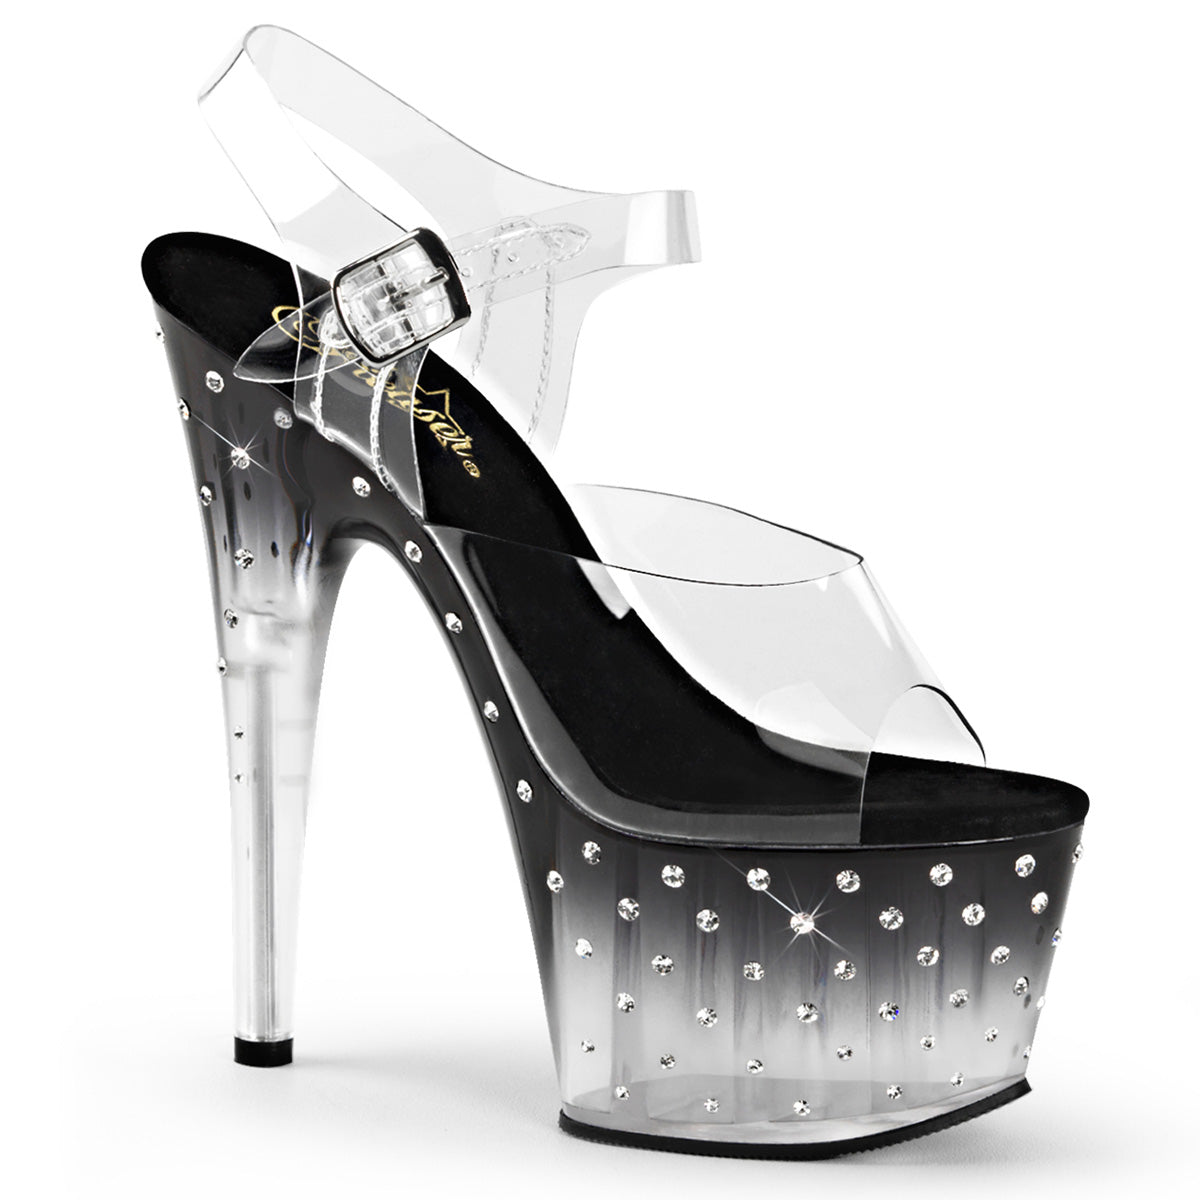 STARDUST-708T 7" Heel Clear and Black Pole Dancing Platforms-Pleaser- Sexy Shoes